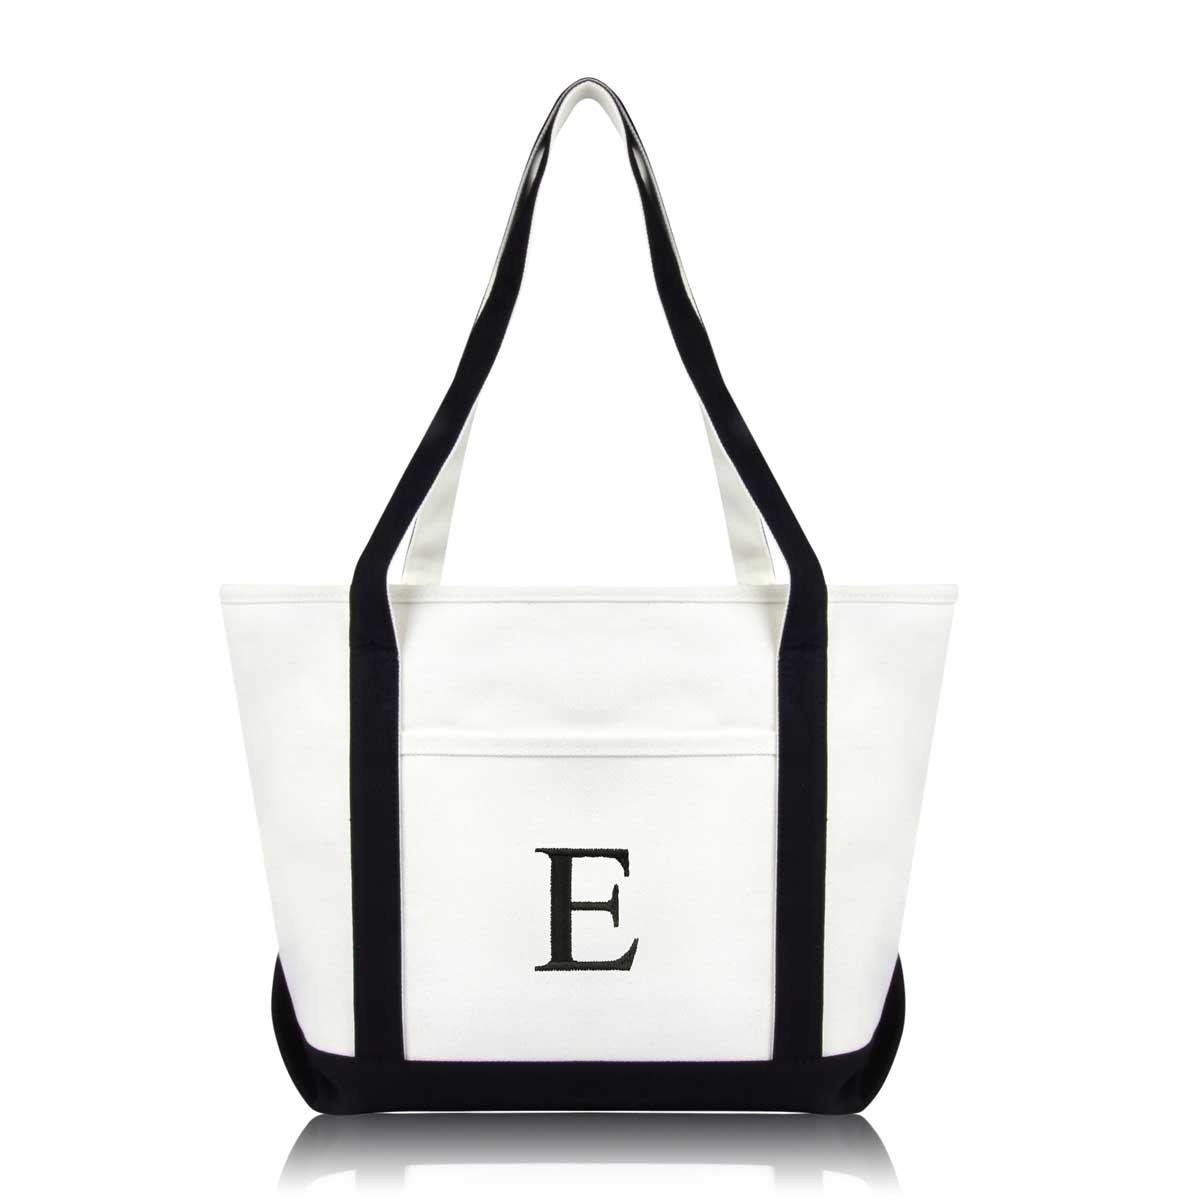 Dalix Medium Personalized Tote Bag Monogrammed Initial Letter - E